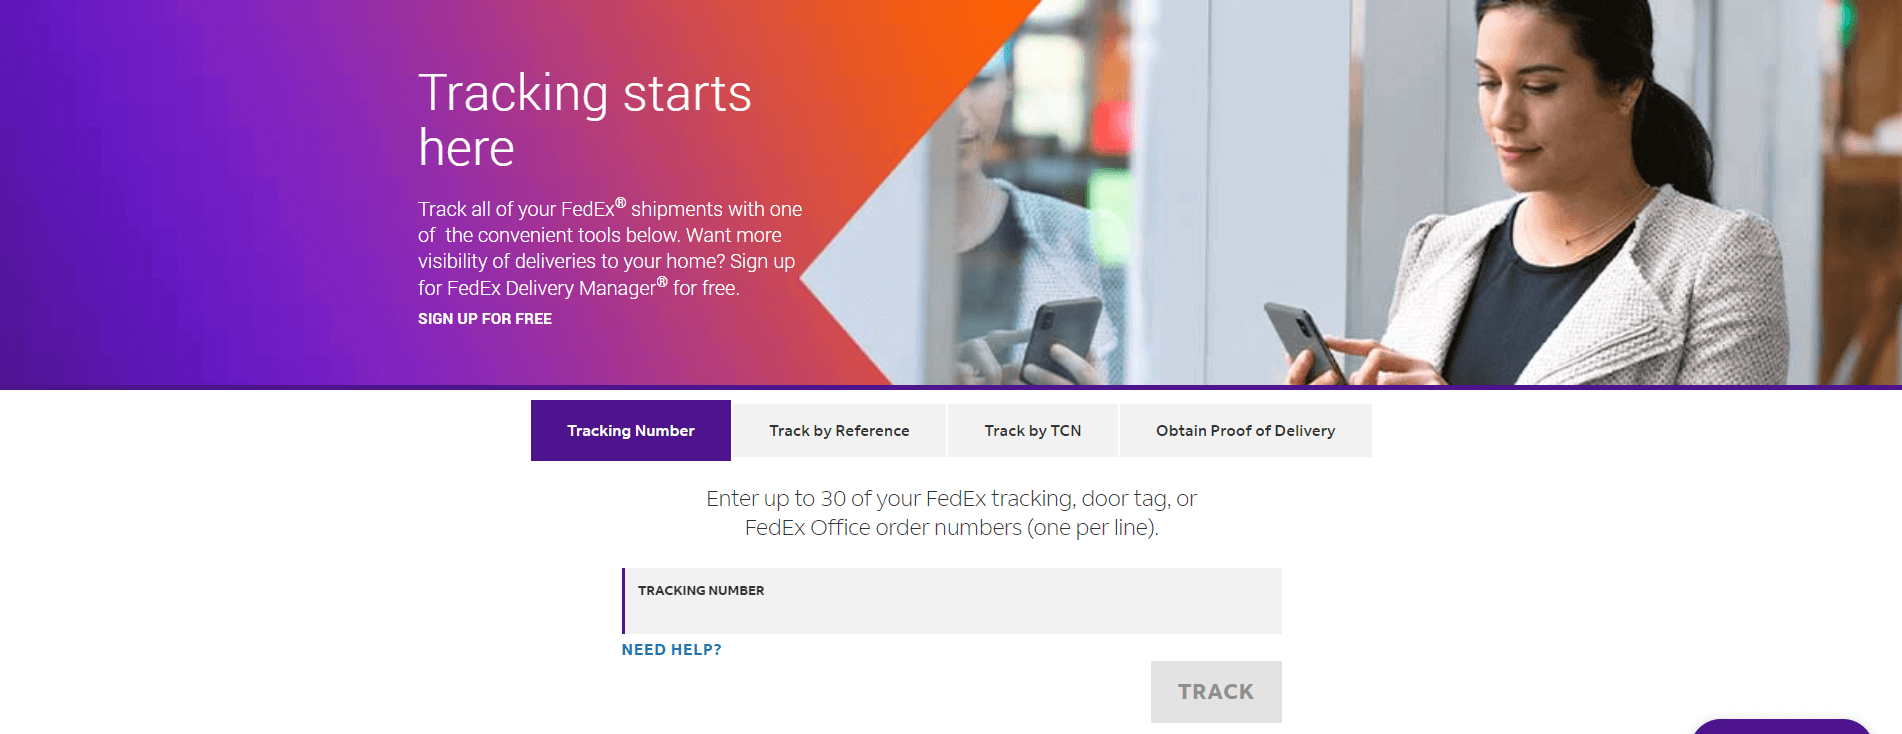 FedEx Freight tracking page